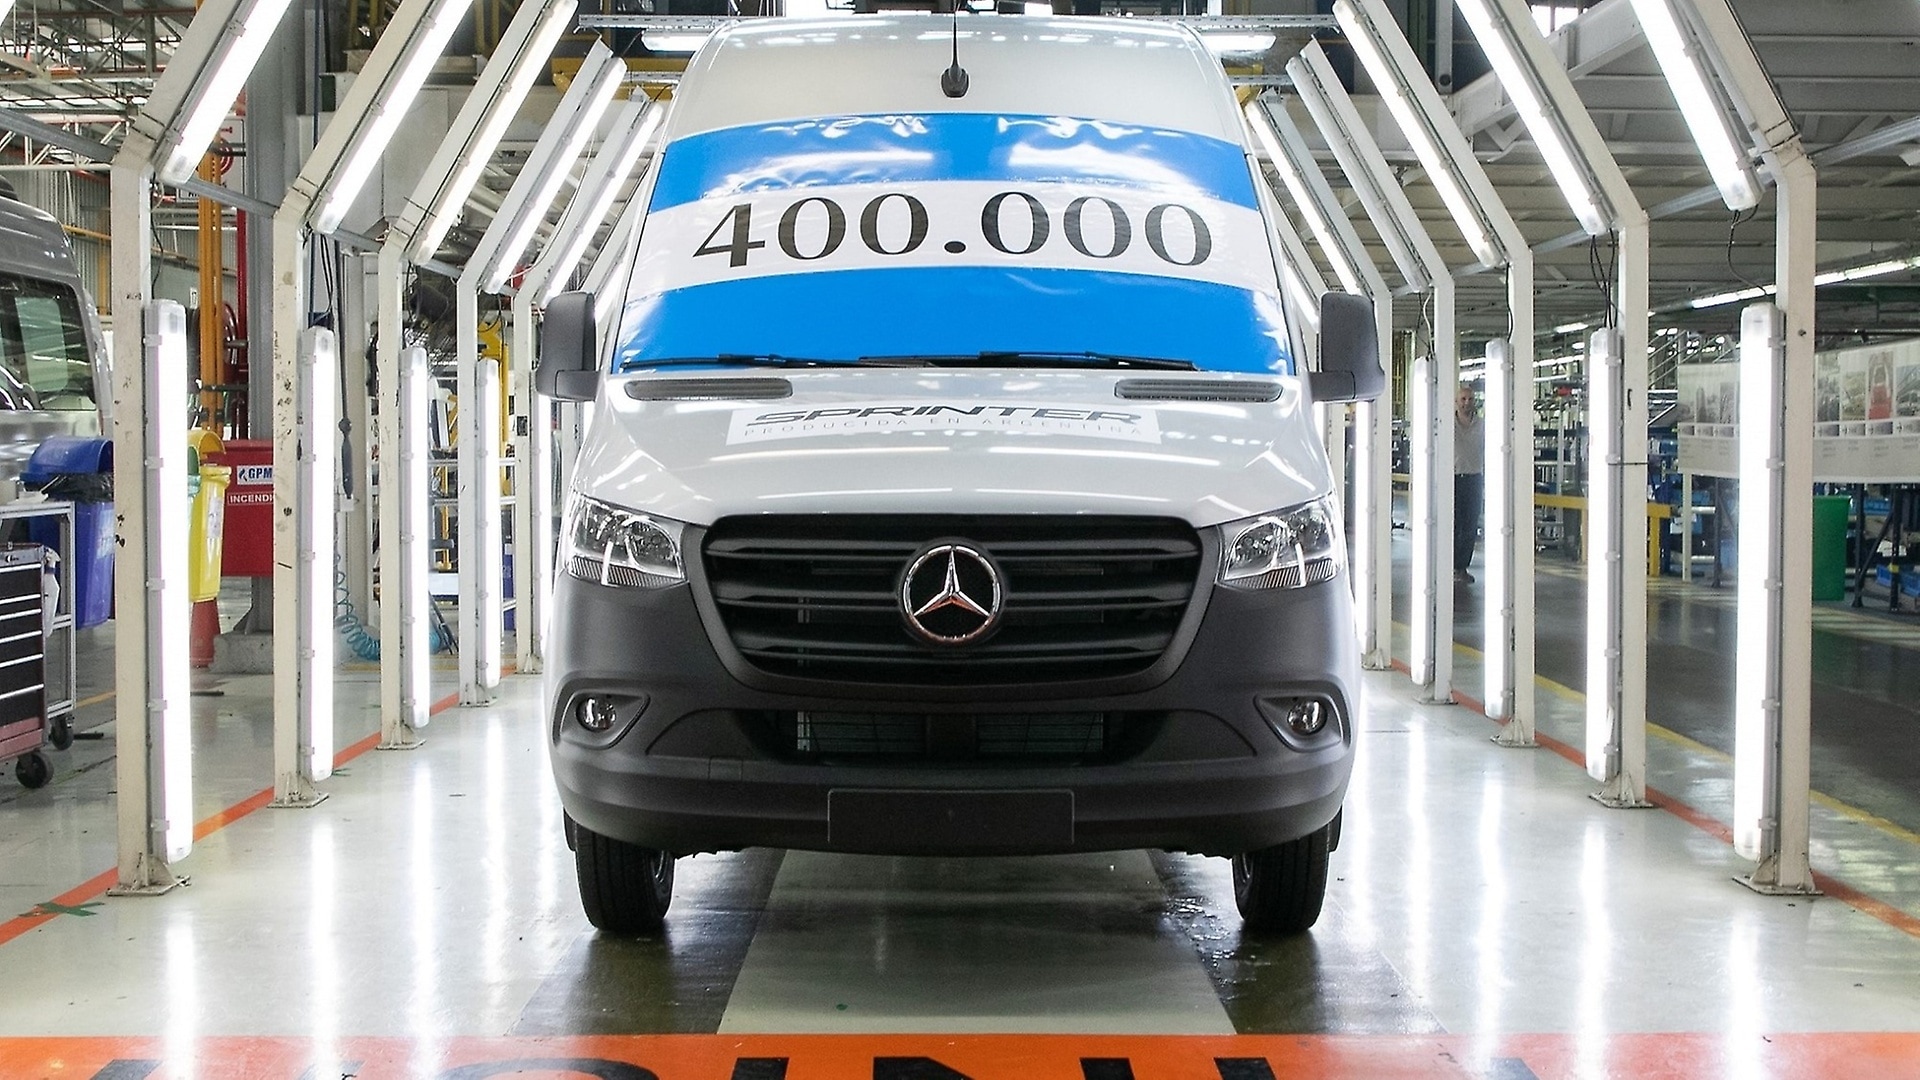 The 400,000th Sprinter that the Argentinian plant built. 